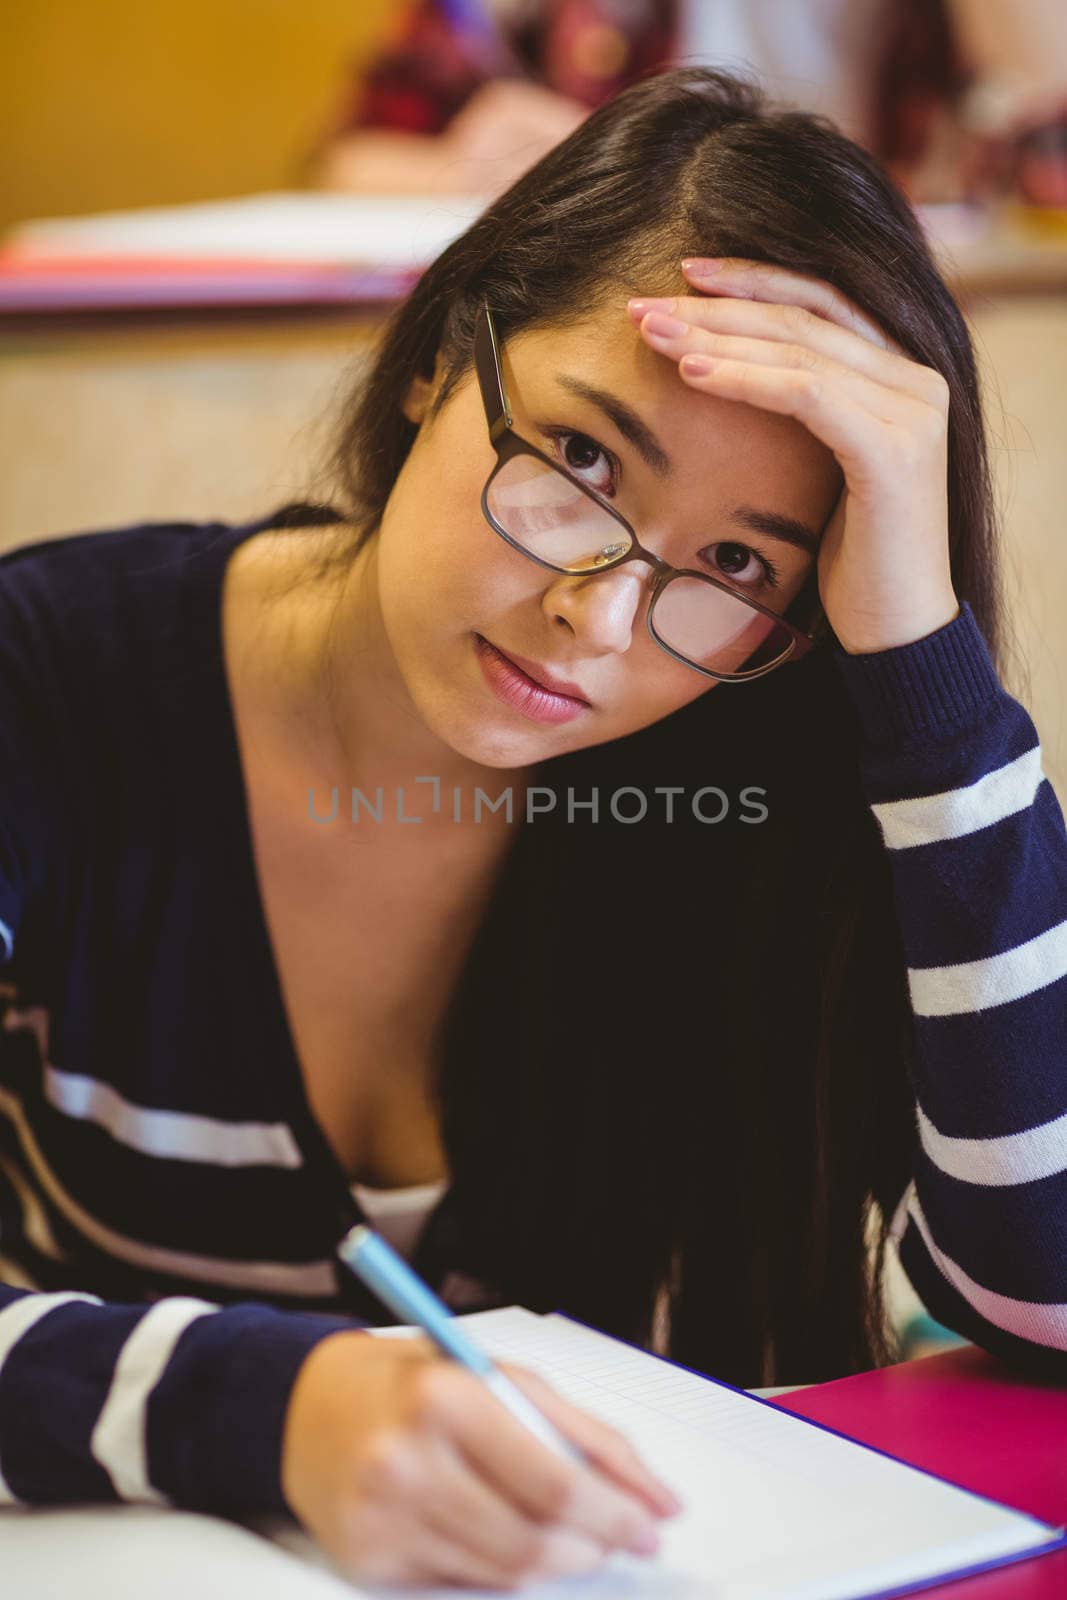 Thoughtful student studying on notebook at the university